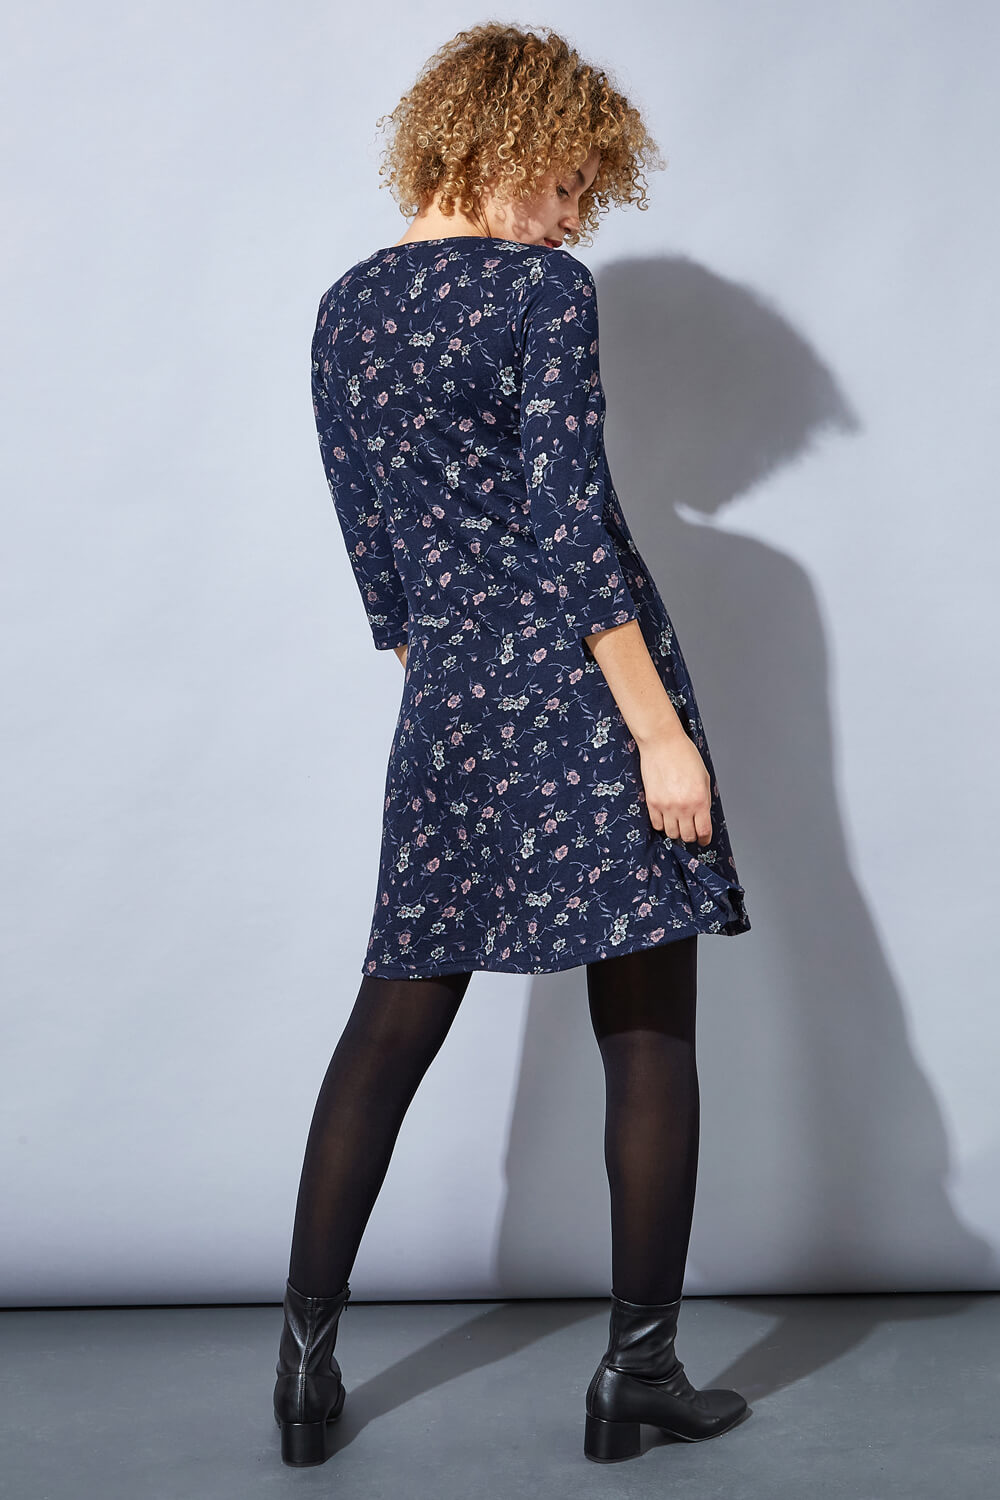 Navy  Floral Print Swing Dress, Image 3 of 4